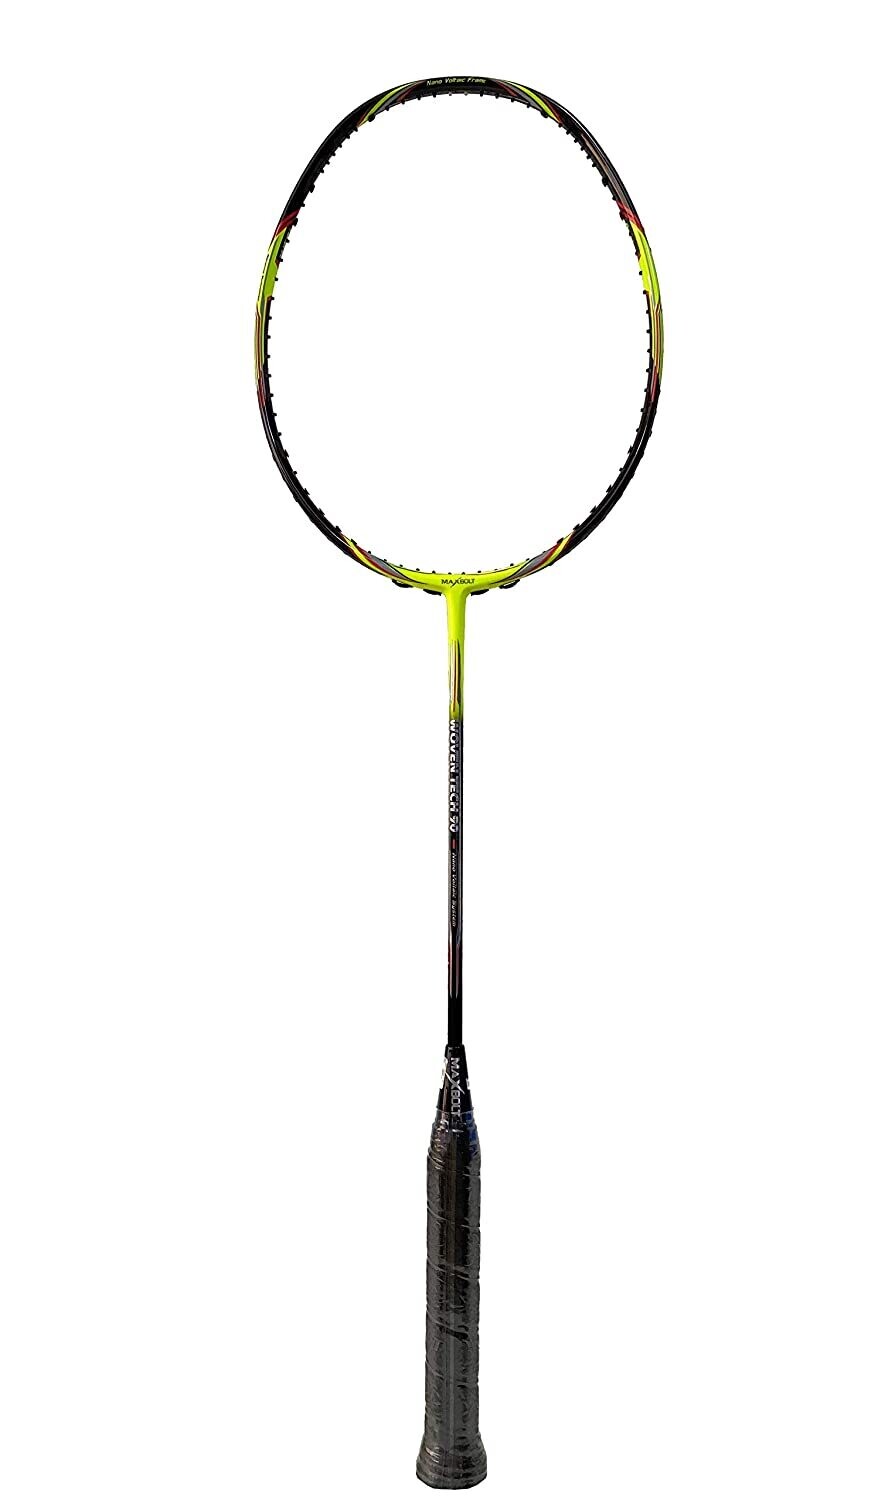 MaxBolt Woven Tech 90 Badminton Racket- with Full Cover